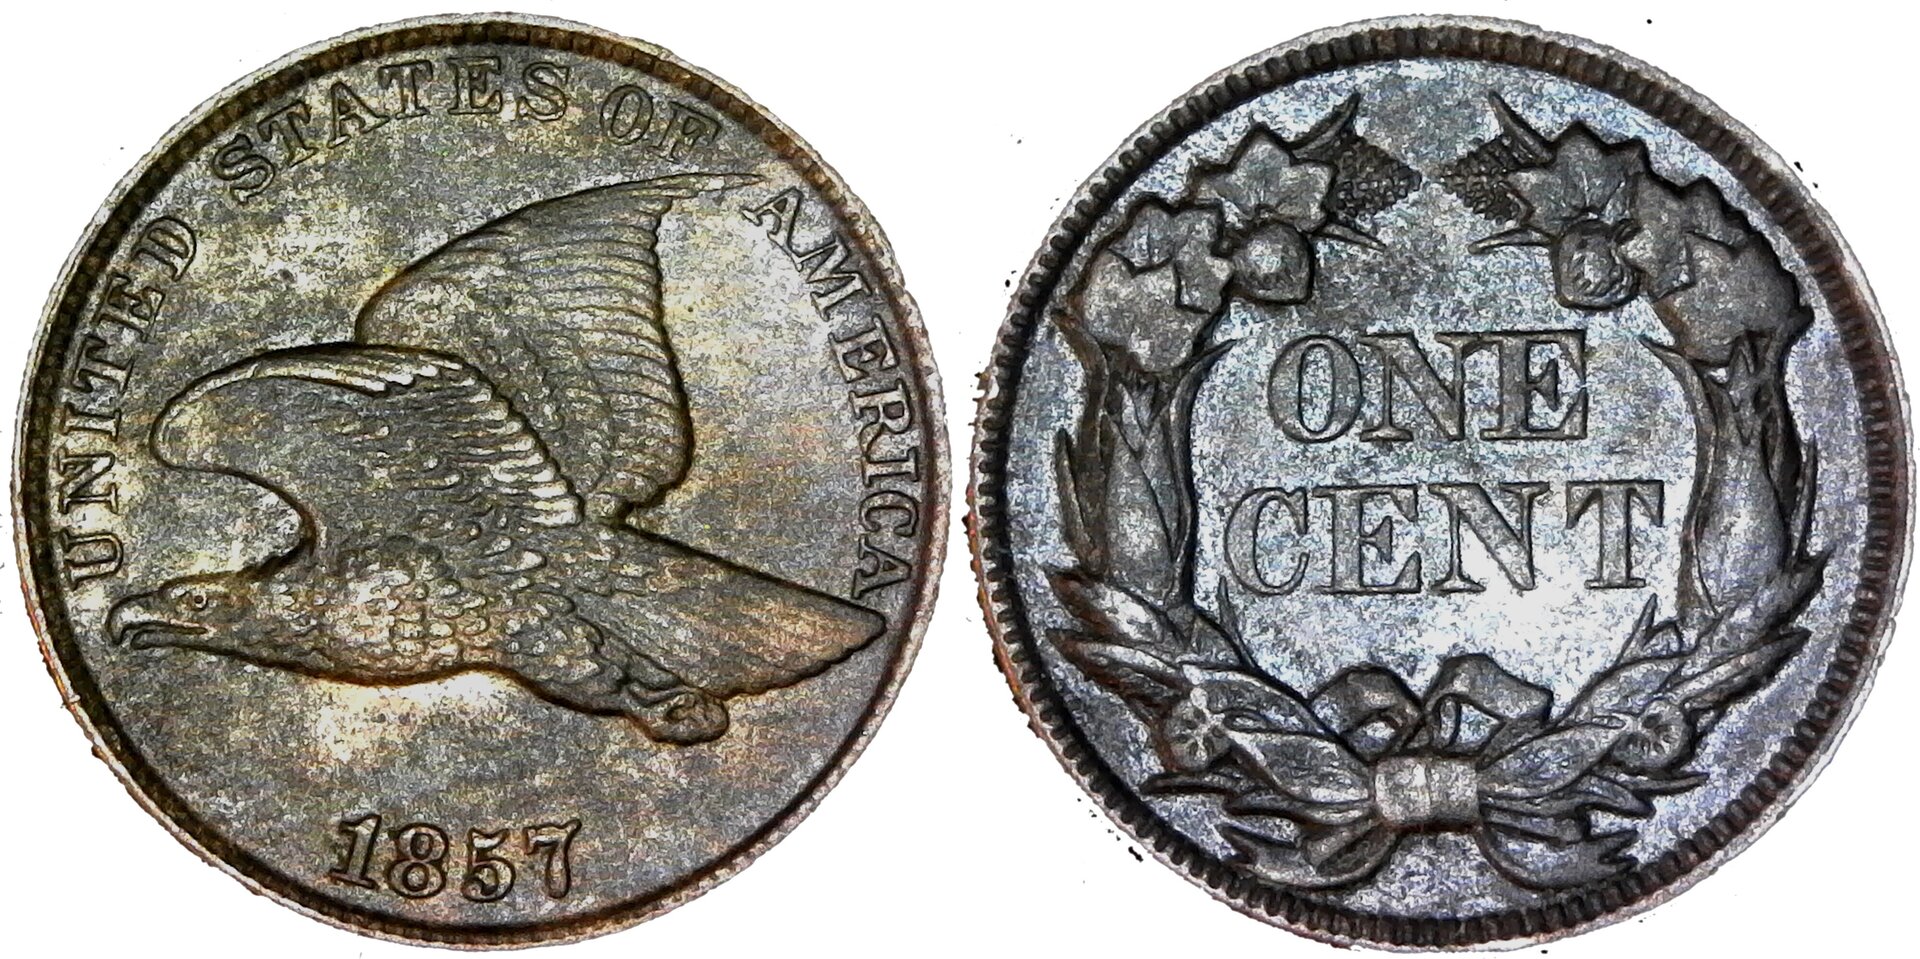 United States One Cent 1857 obv-cutout-side.jpg